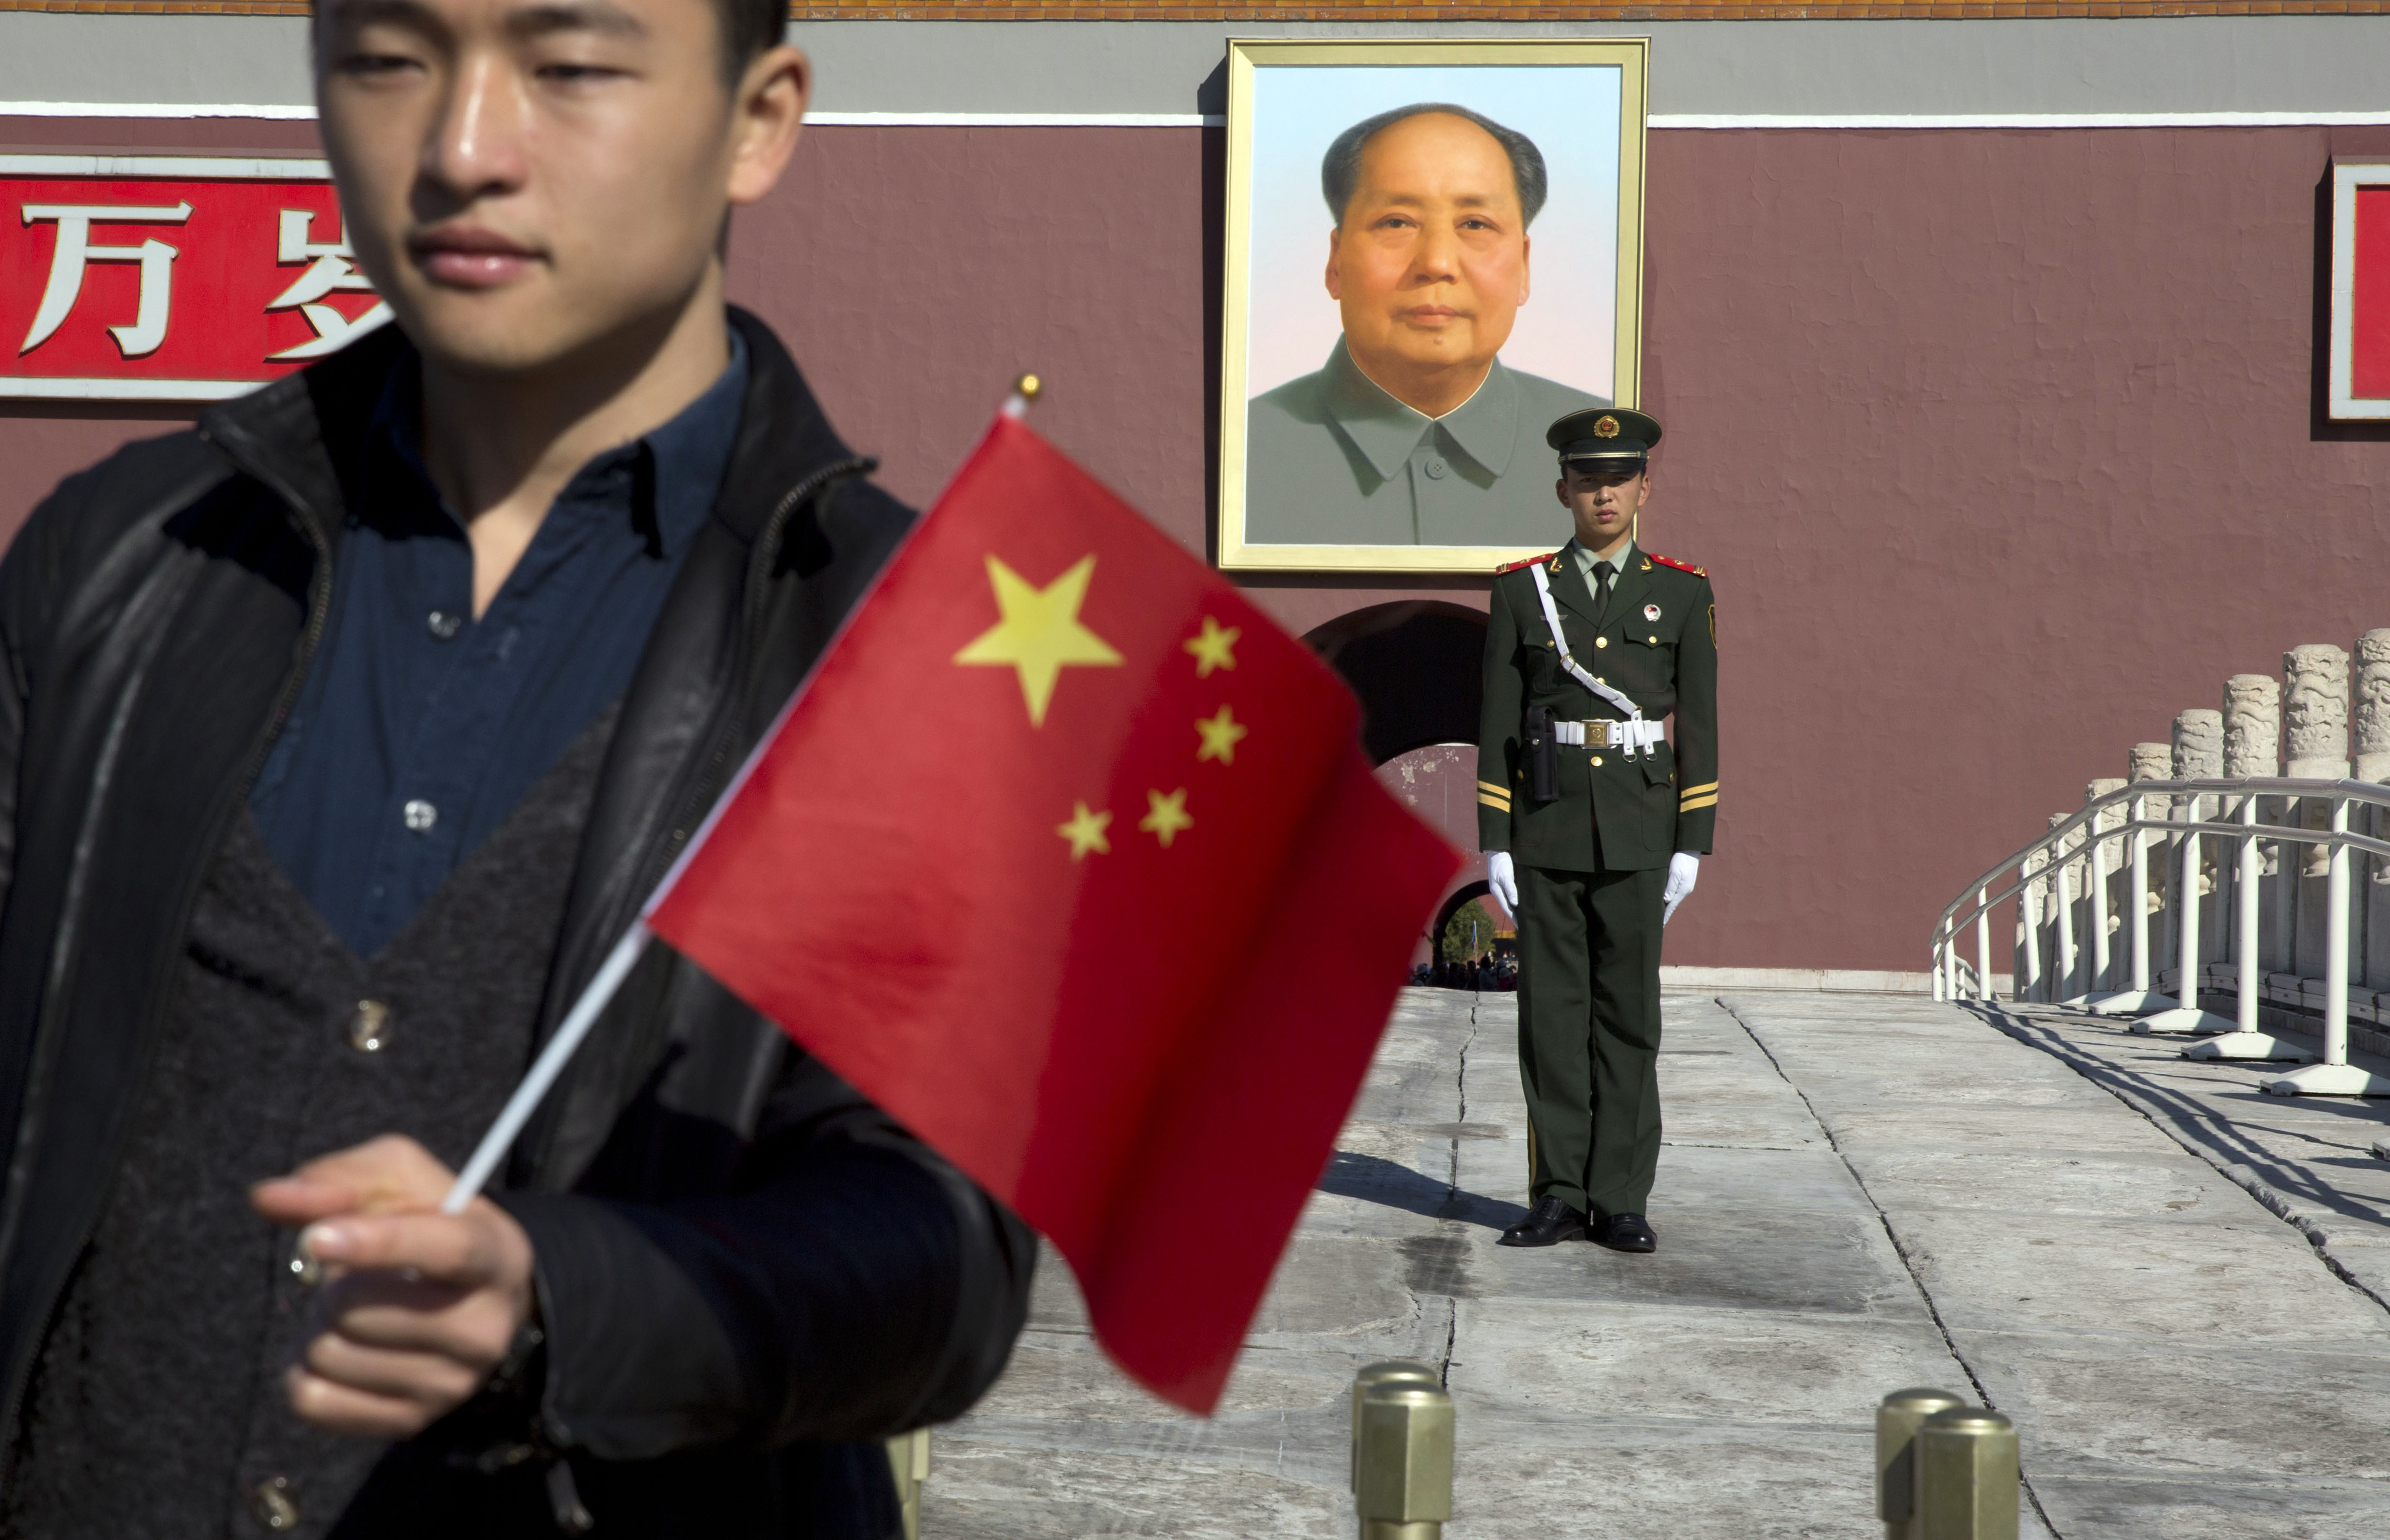 China: Chinese professor sacked after criticising Mao online